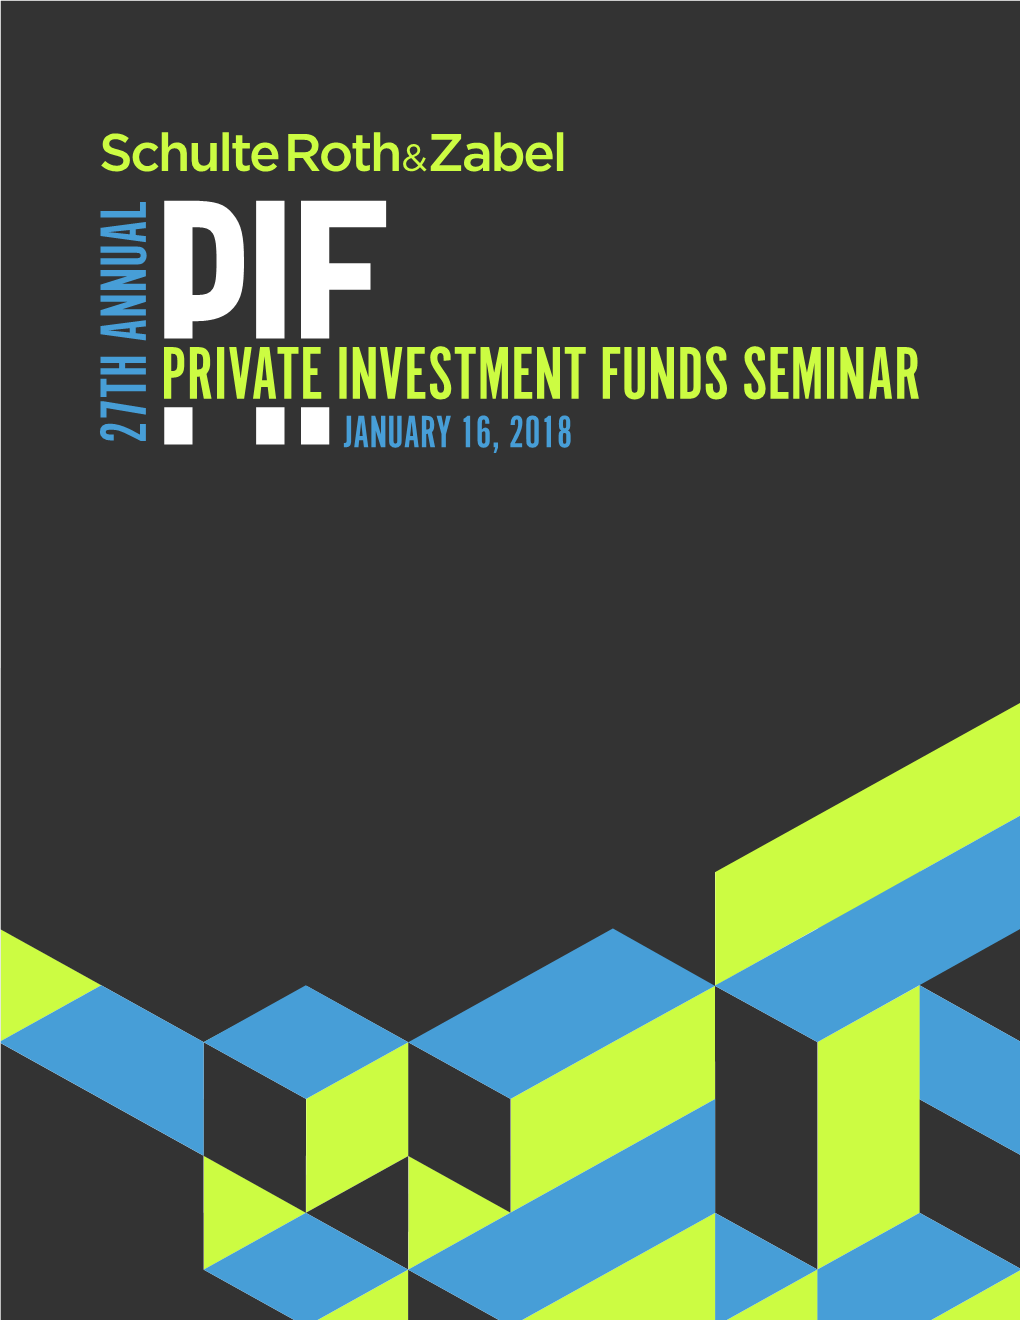 Private Investment Funds Seminar January 16, 2018